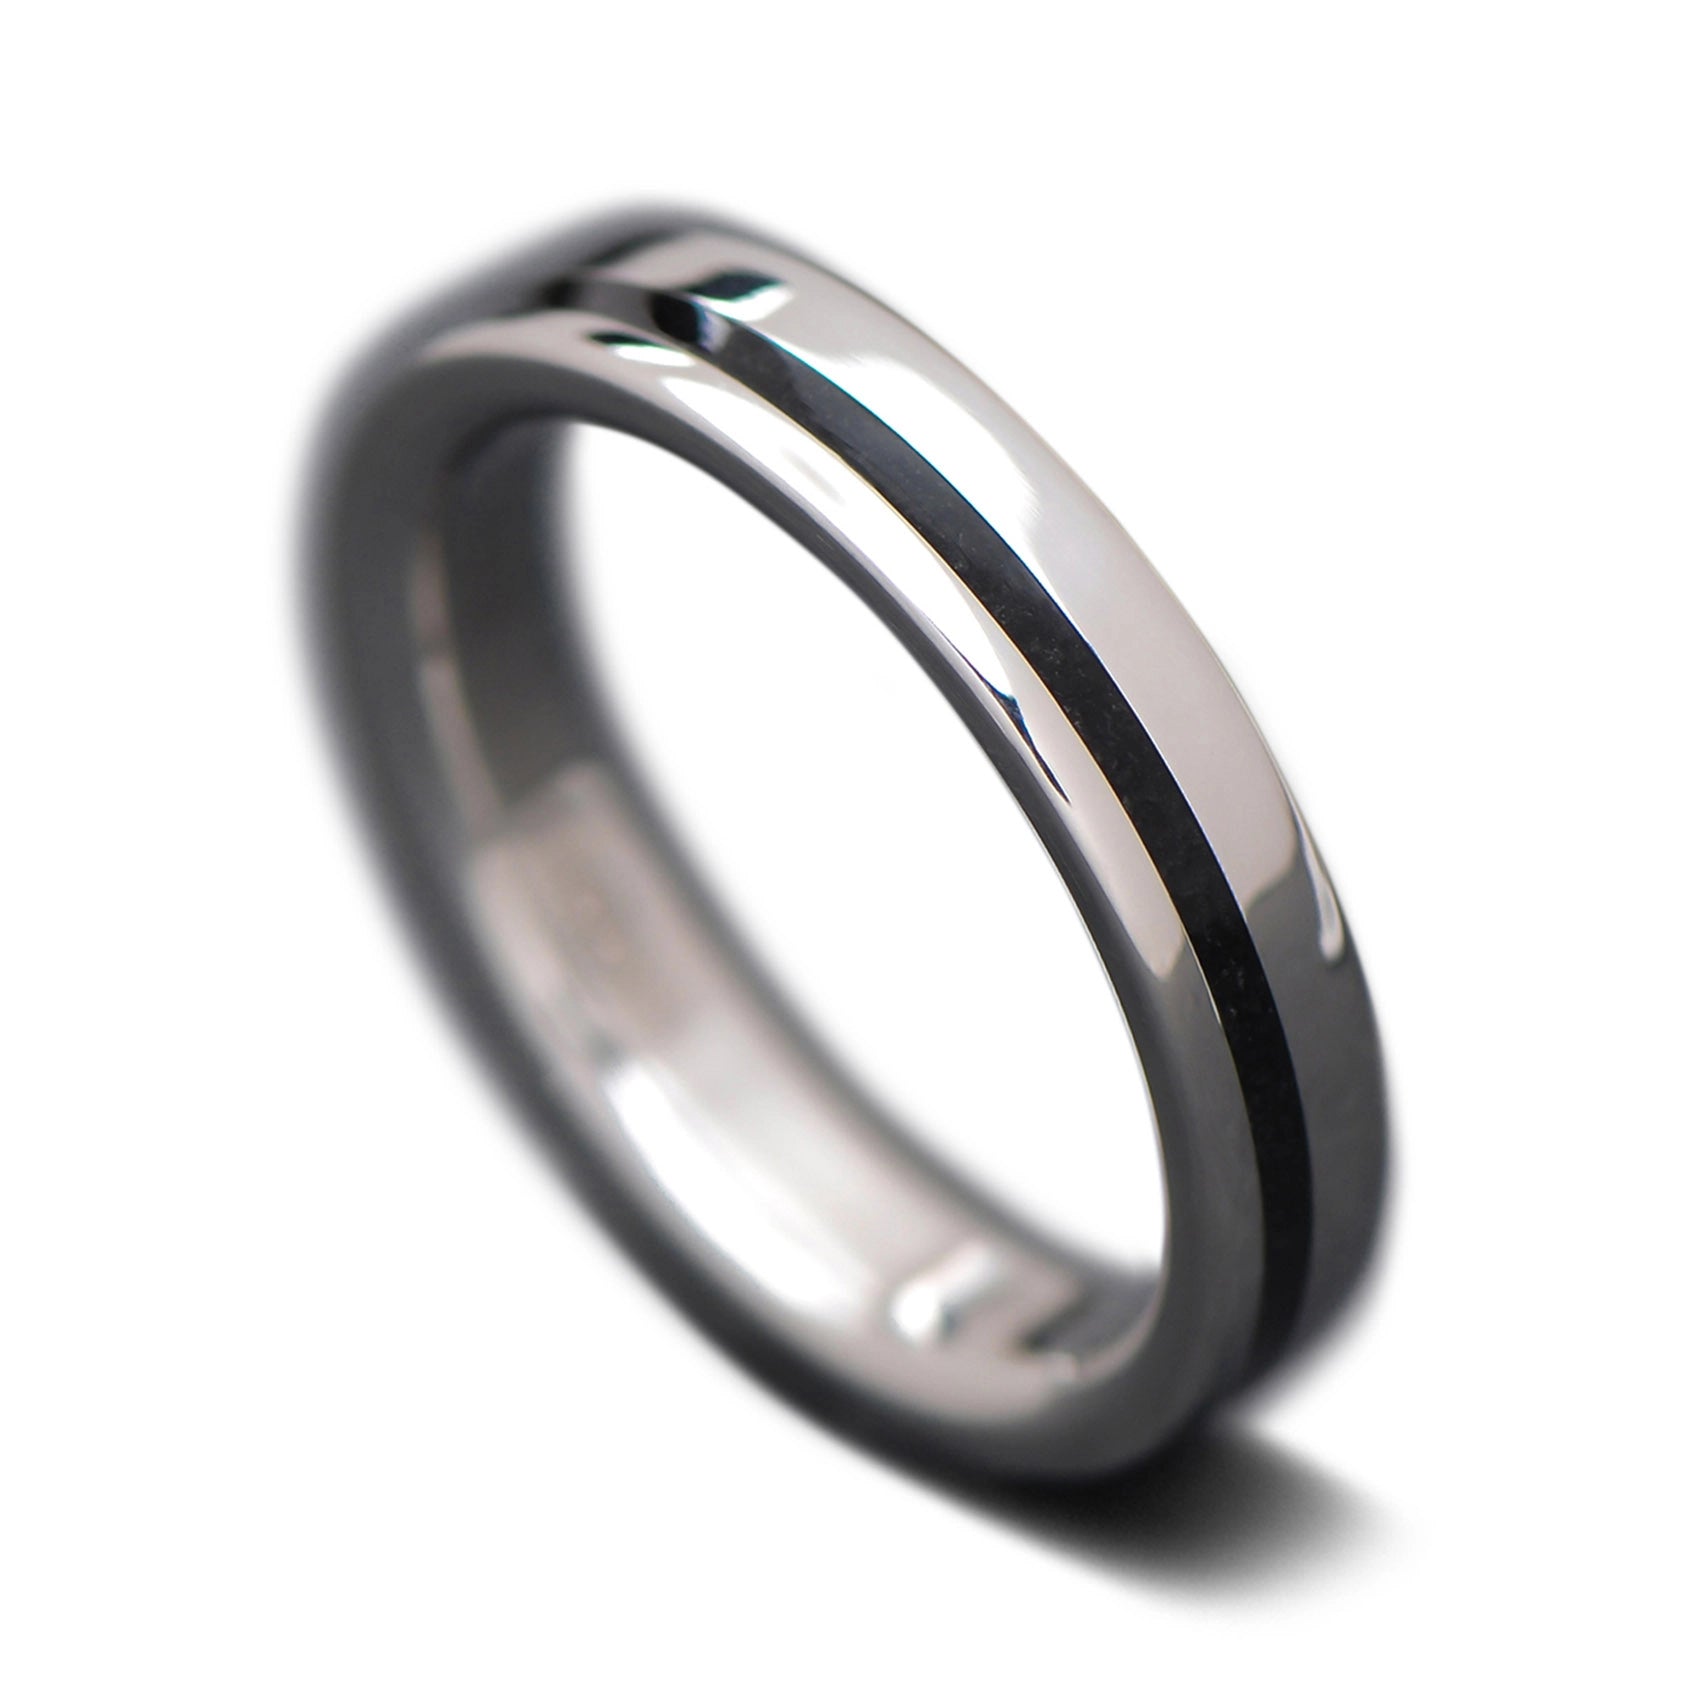 Titanium Core Ring with Black Onyx inlay, 4mm -THE SHIFT